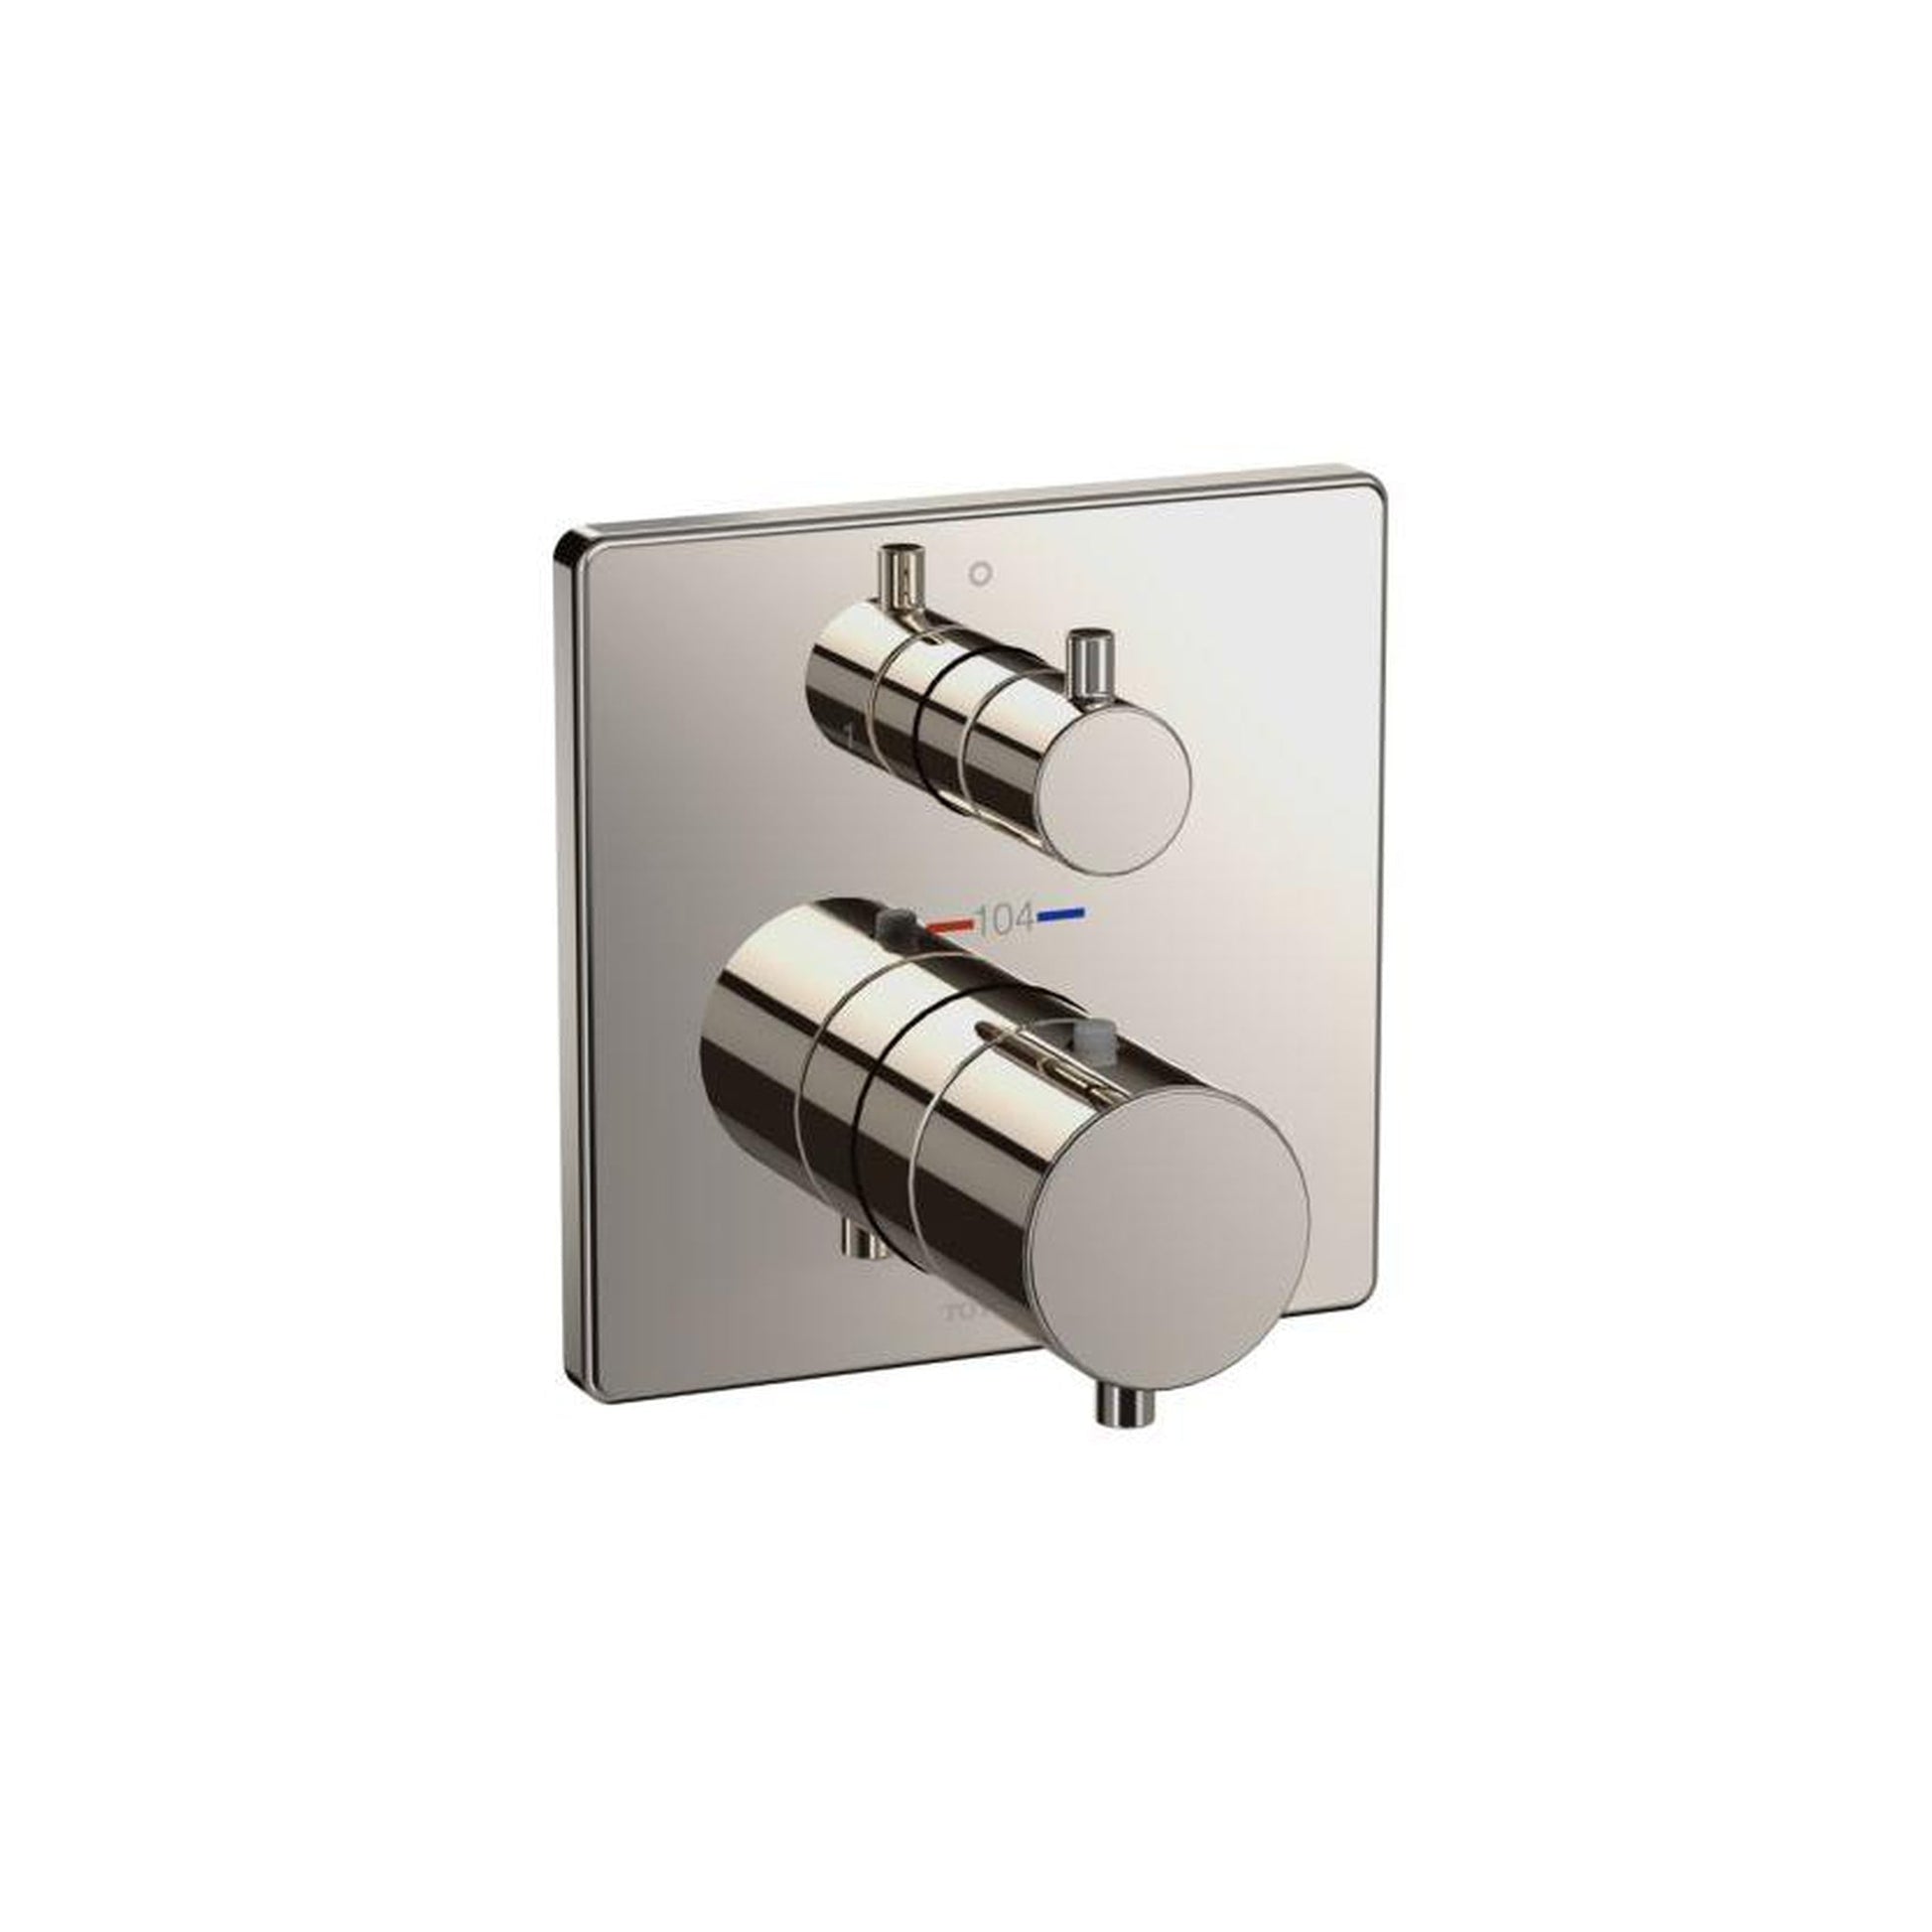 Toto Thermo 2WAY Polished Nickel Div Valve,G,Square